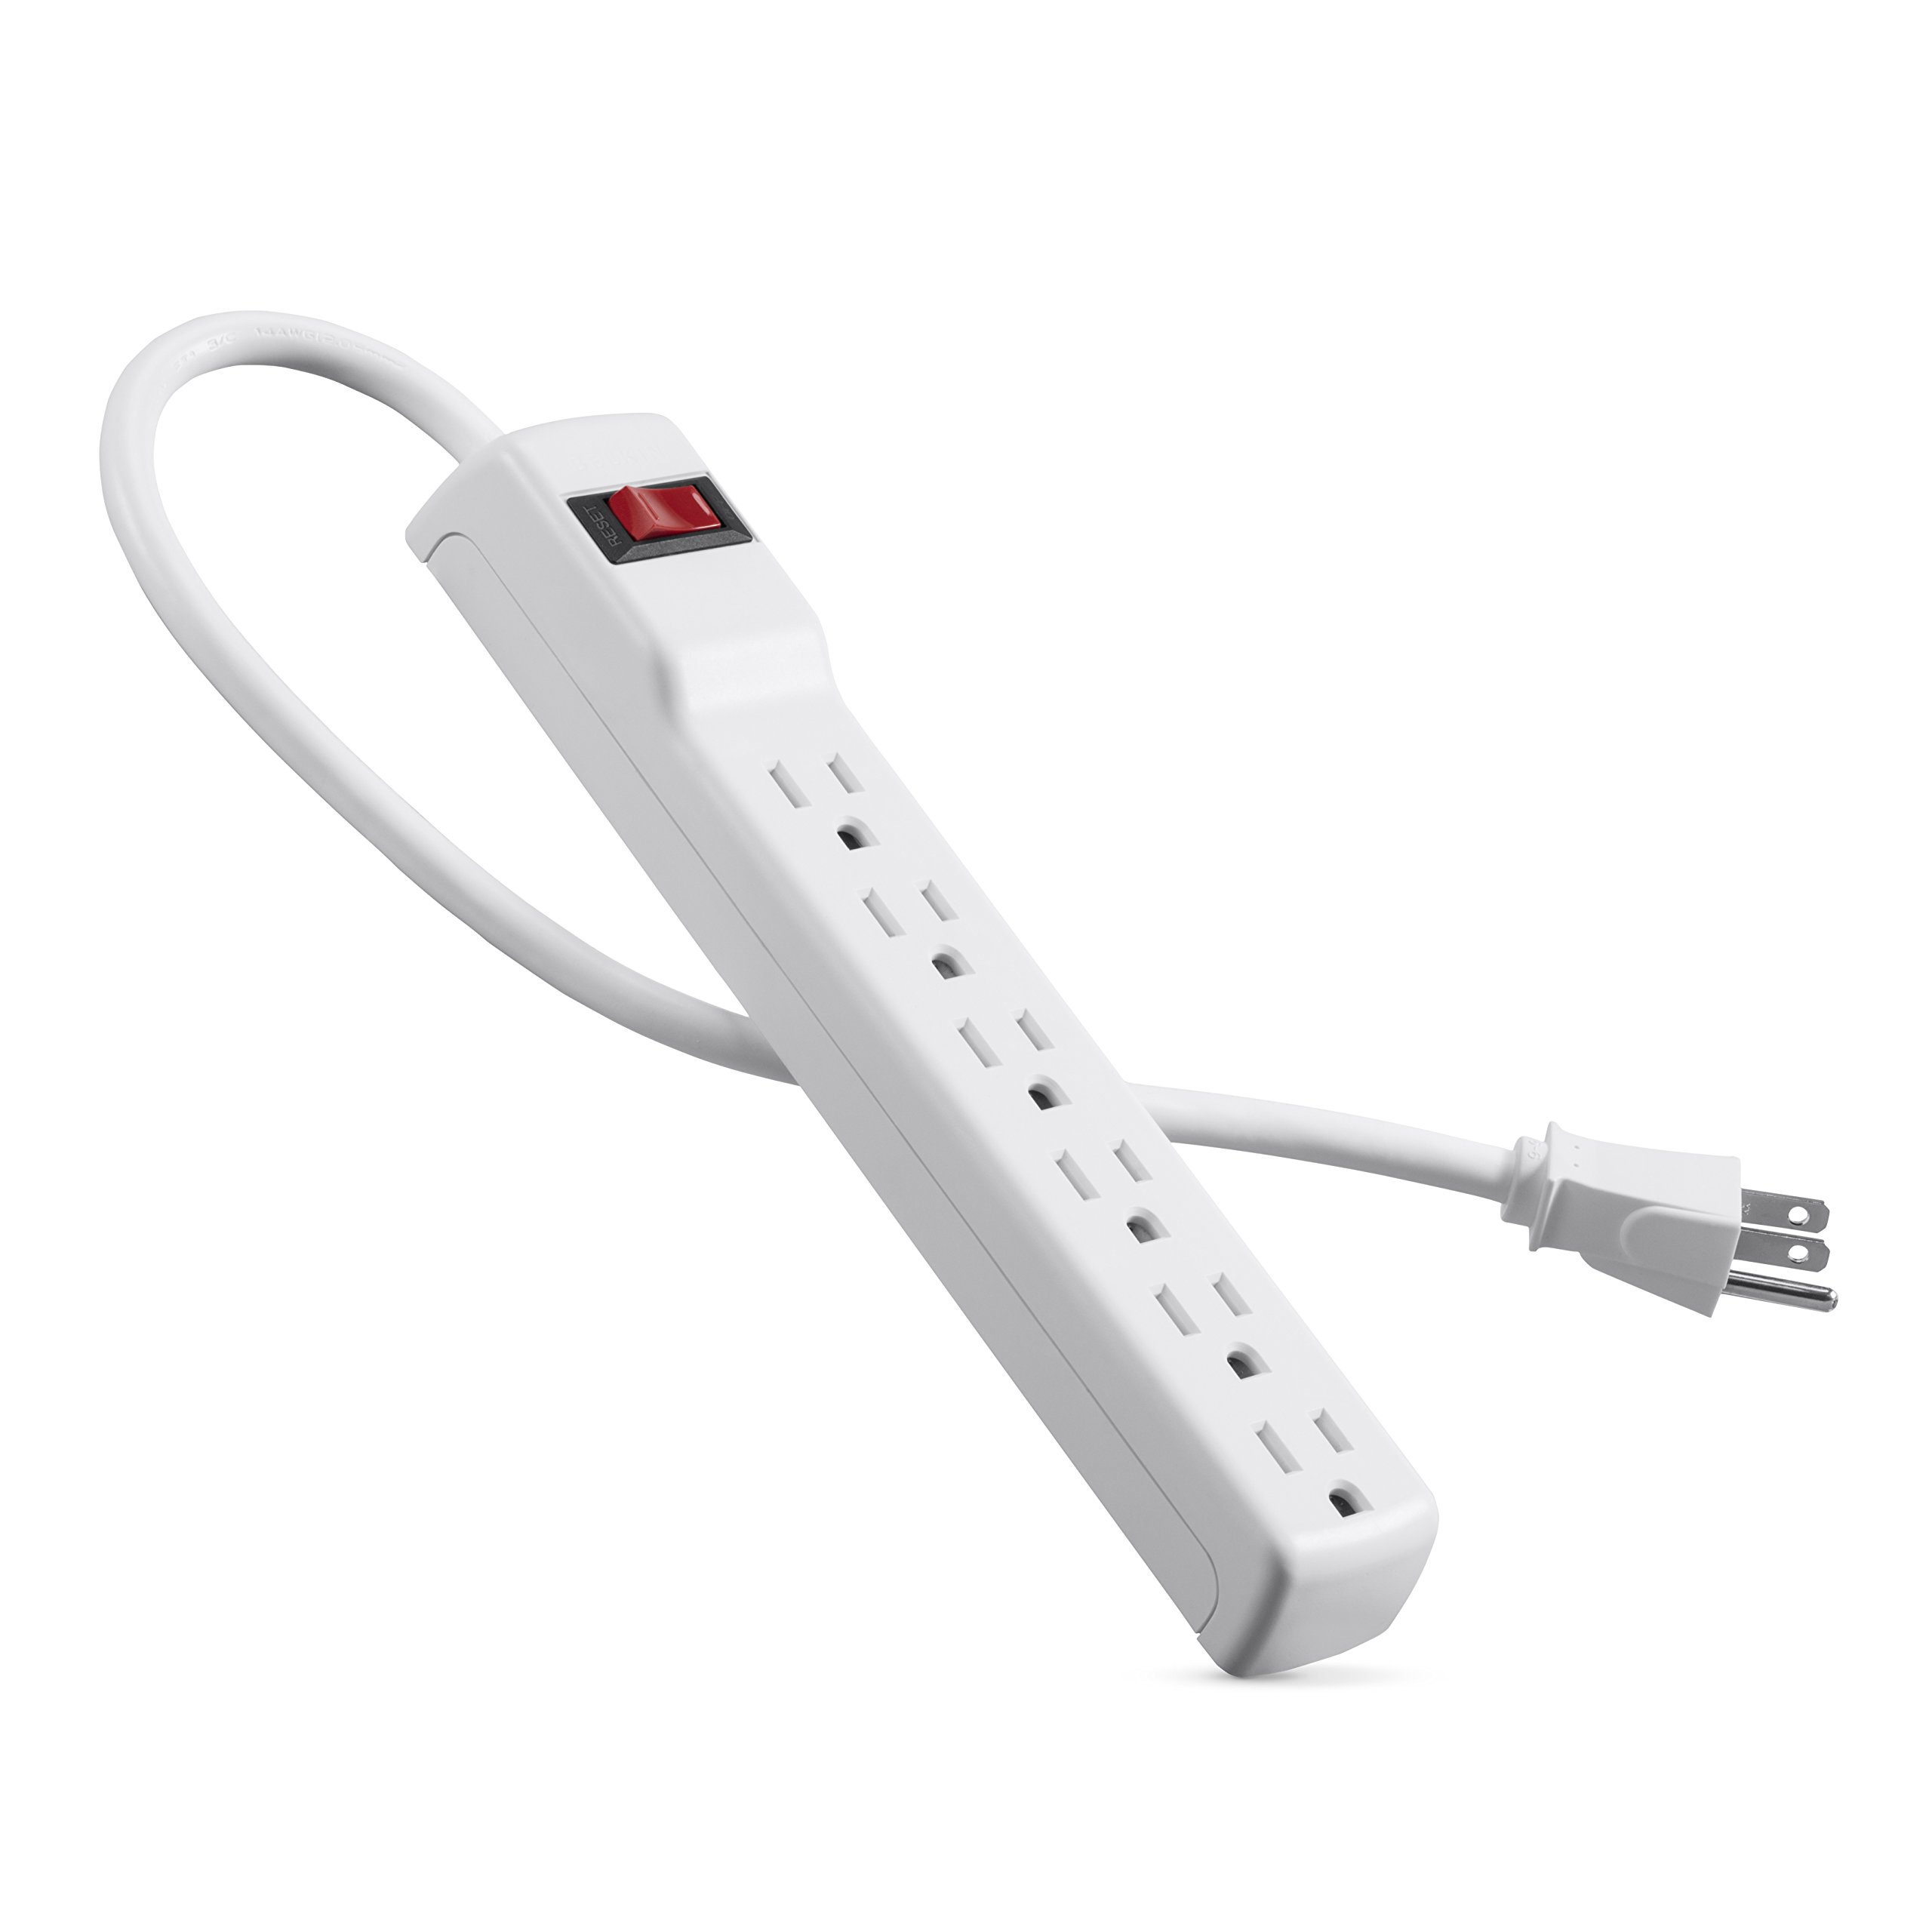 Belkin Power Strip Surge Protector - 6 AC Multiple Outlets, 2 ft Long Heavy Duty Metal Extension Cord for Home, Office, Travel, Computer Desktop & Phone Charging Brick - 200 Joules, White (2 Pack)